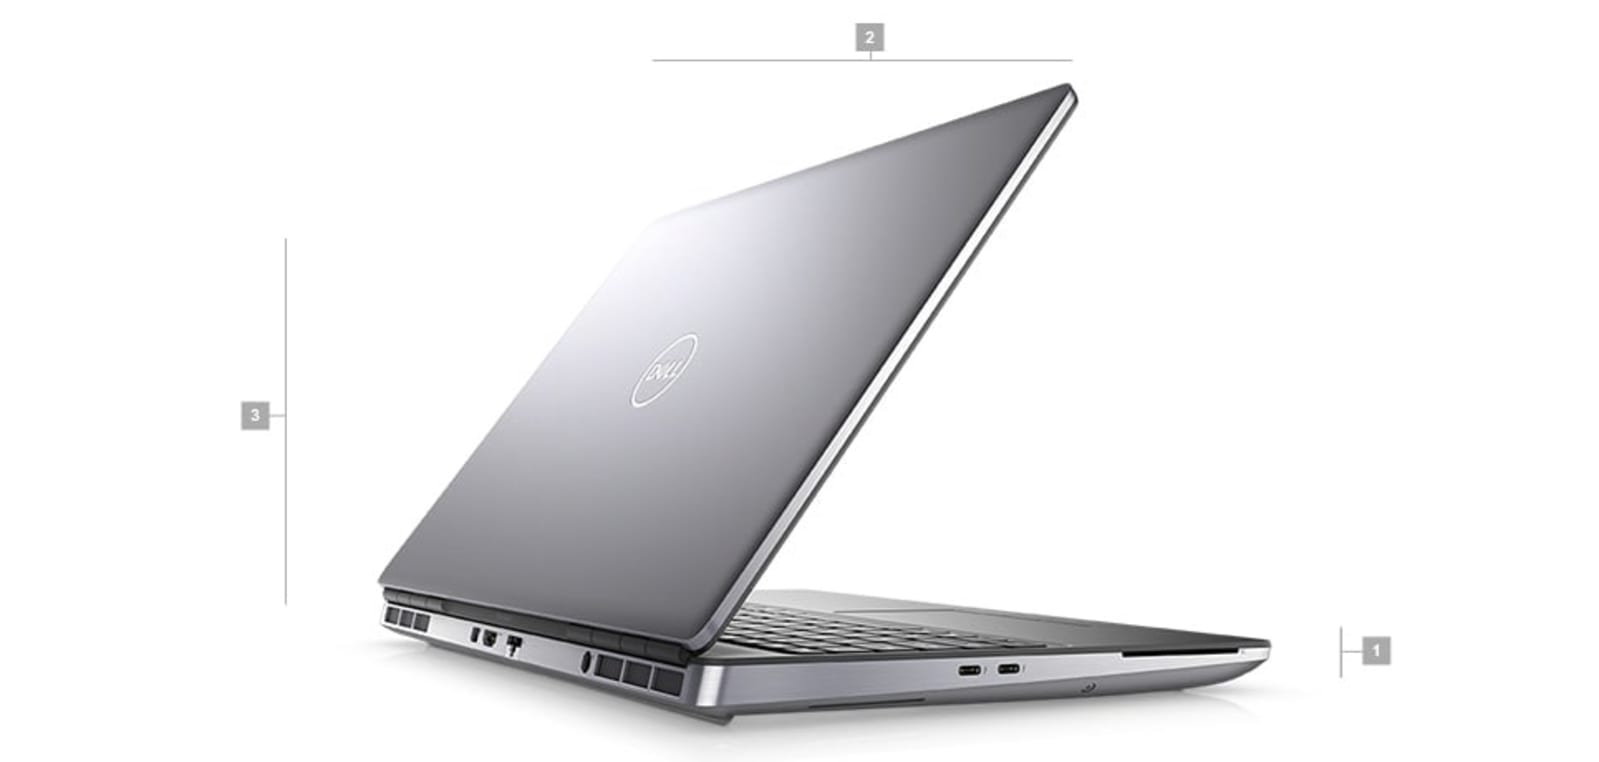 Restored Dell Precision 7000 7560 Workstation Laptop (2021) | 15.6" FHD | Core i5 - 512GB SSD - 64GB RAM - Nvidia T1200 | 6 Cores @ 4.6 GHz - 11th Gen CPU (Refurbished) - image 2 of 11